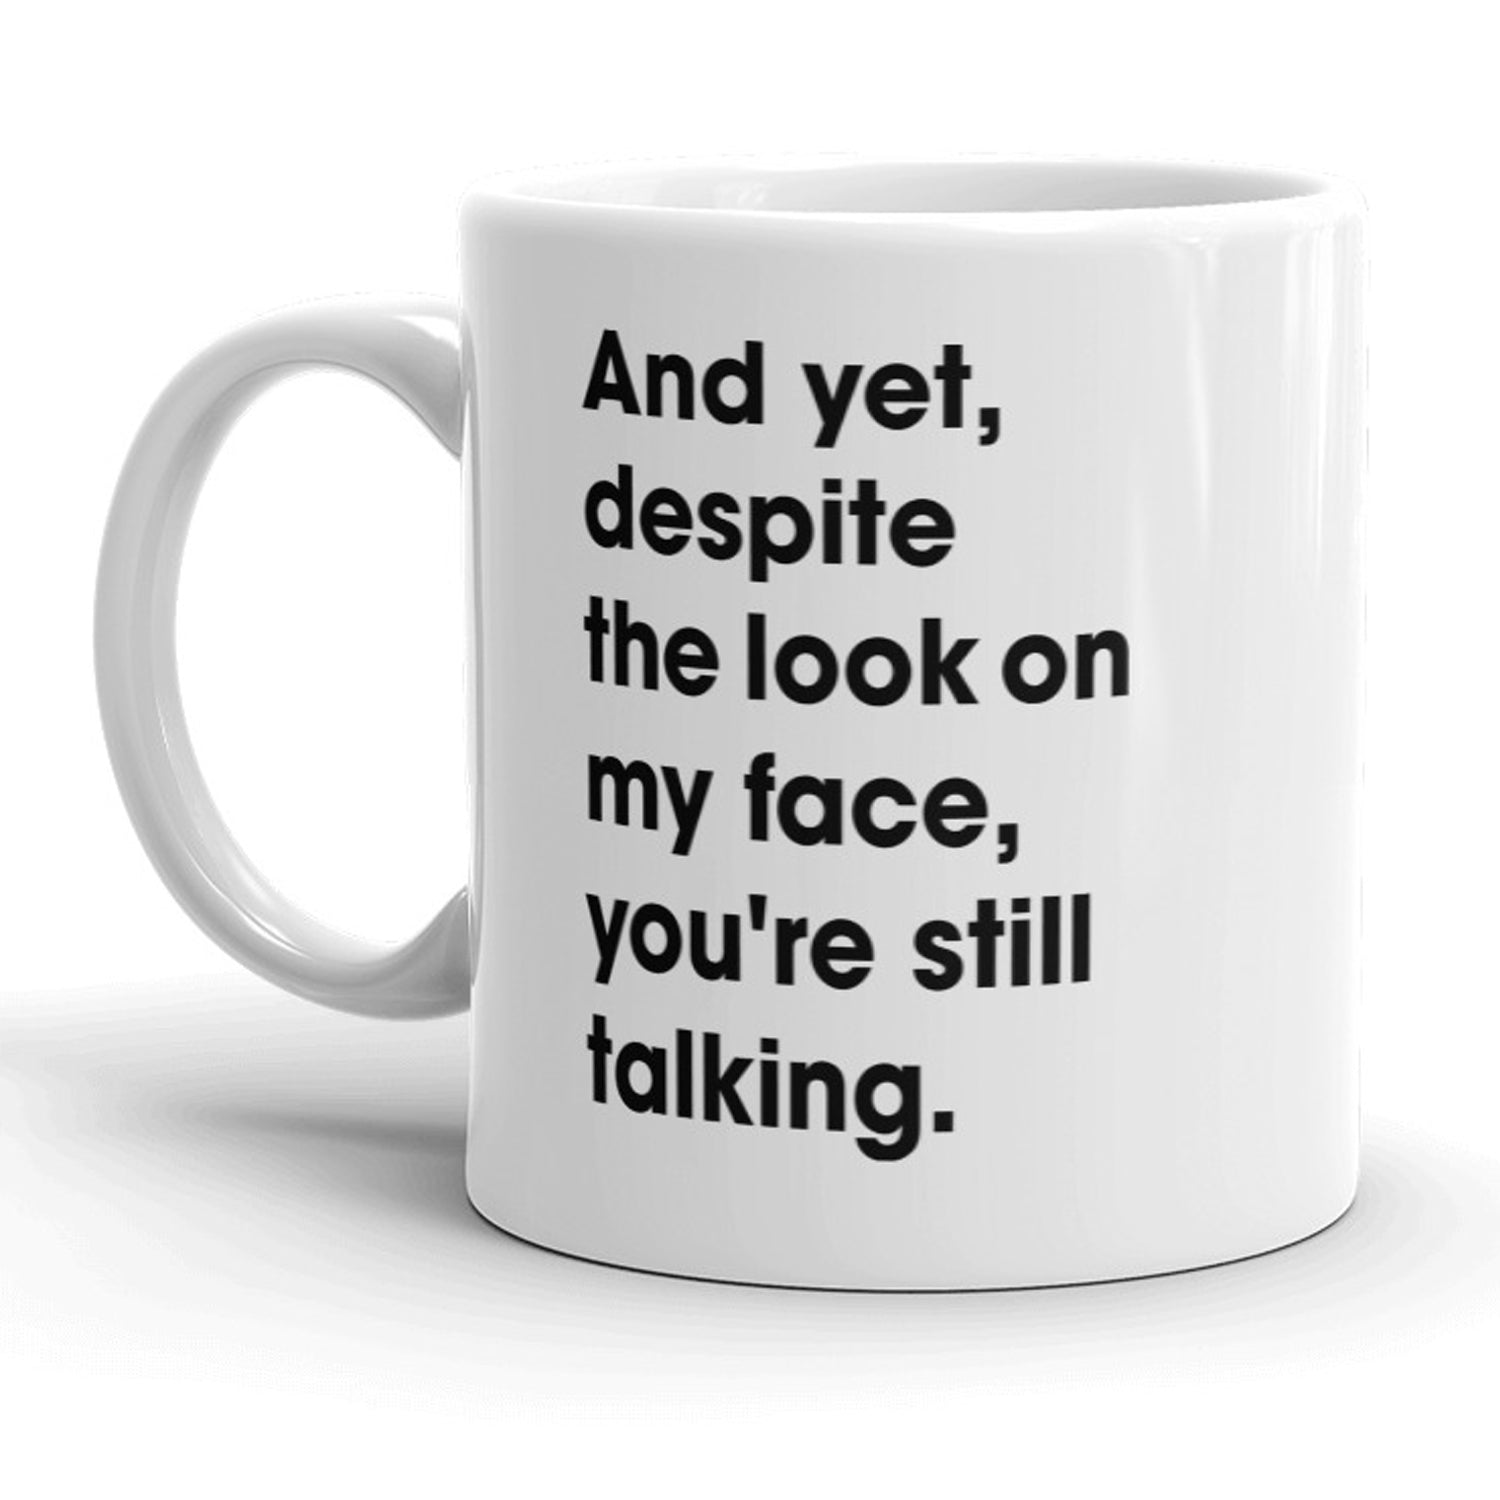 Funny White And Yet You're Still Talking Coffee Mug Nerdy Sarcastic Tee